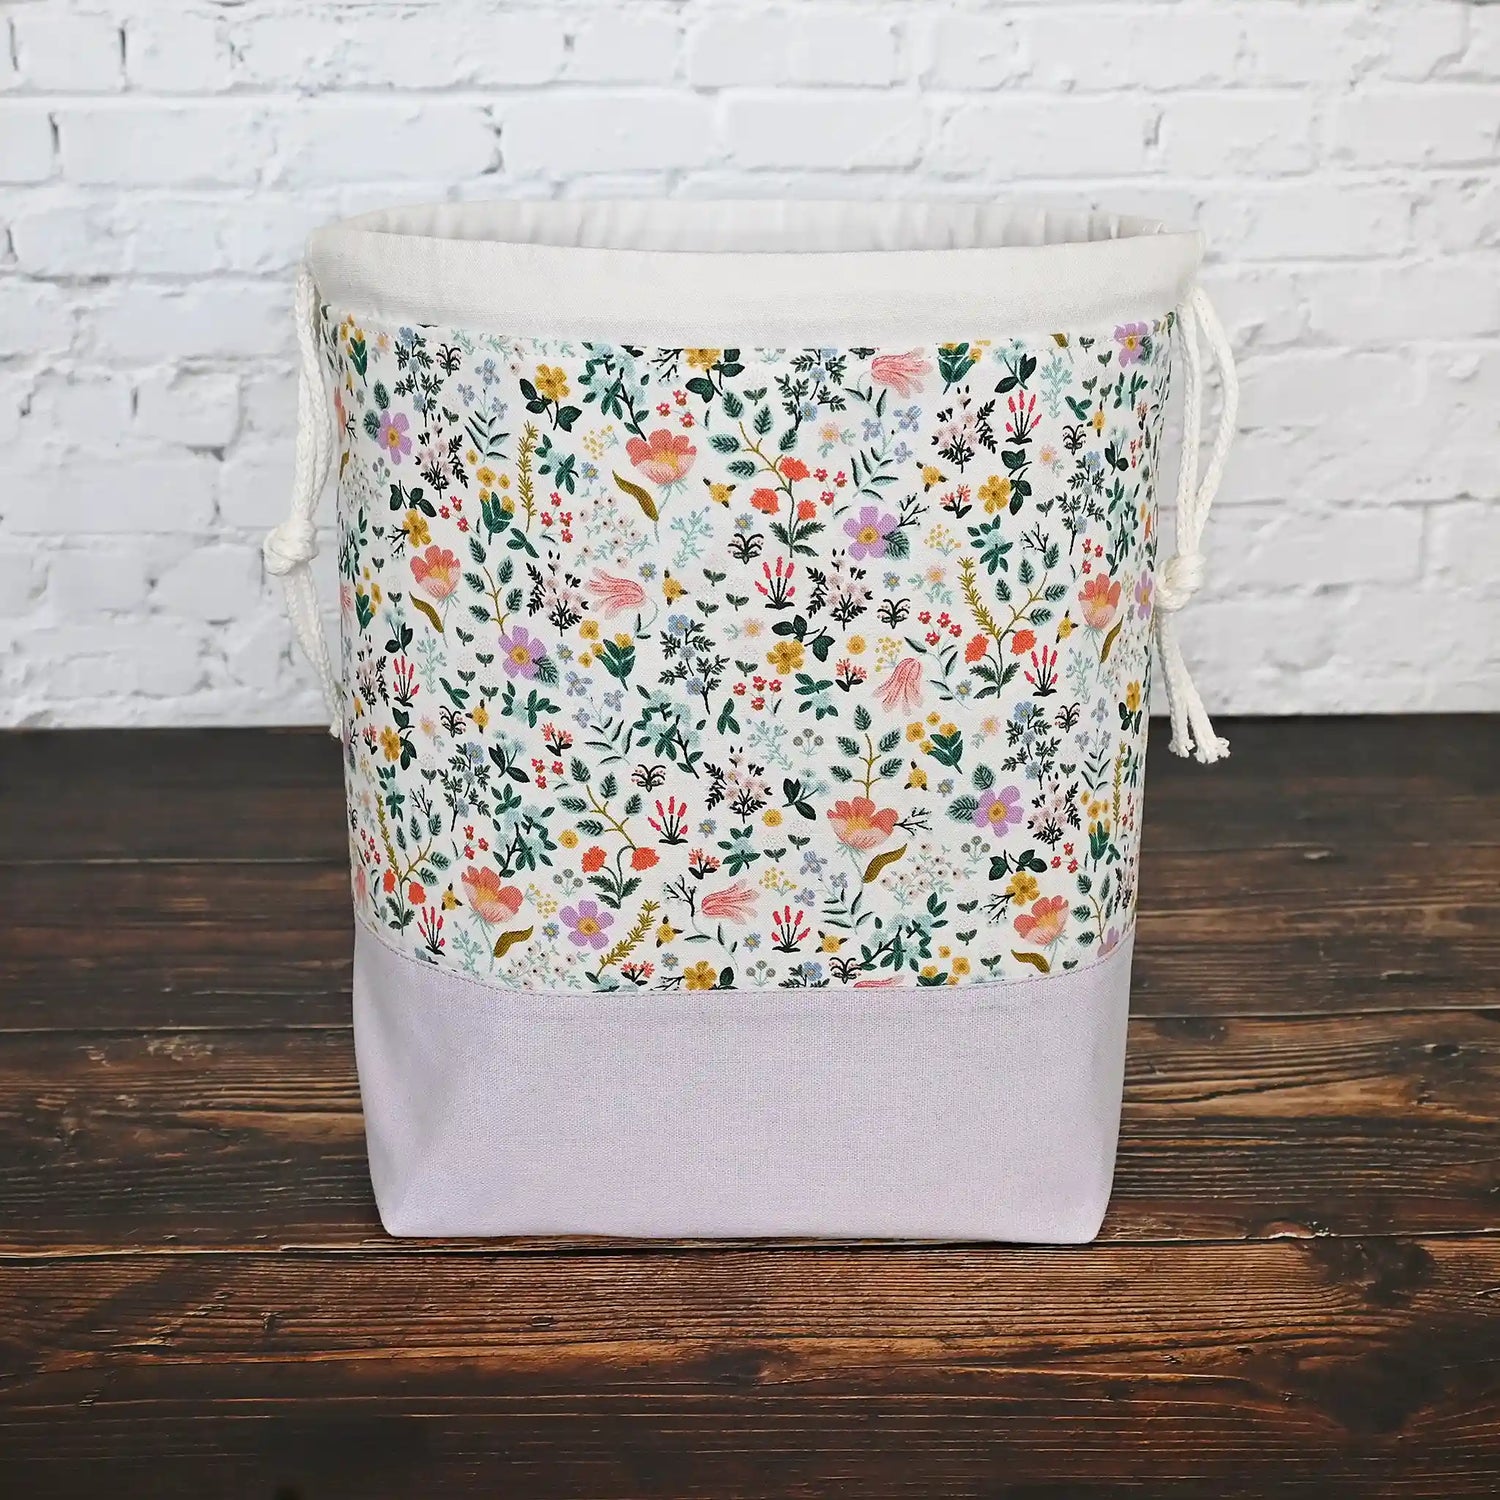 Pretty white floral and mauve linen drawstring project bag in Rifle Paper Co's Curio fabric.  The interior is a pretty mauve fabric with pockets.  Made in Nova Scotia, Canada by Yellow Petal Handmade.